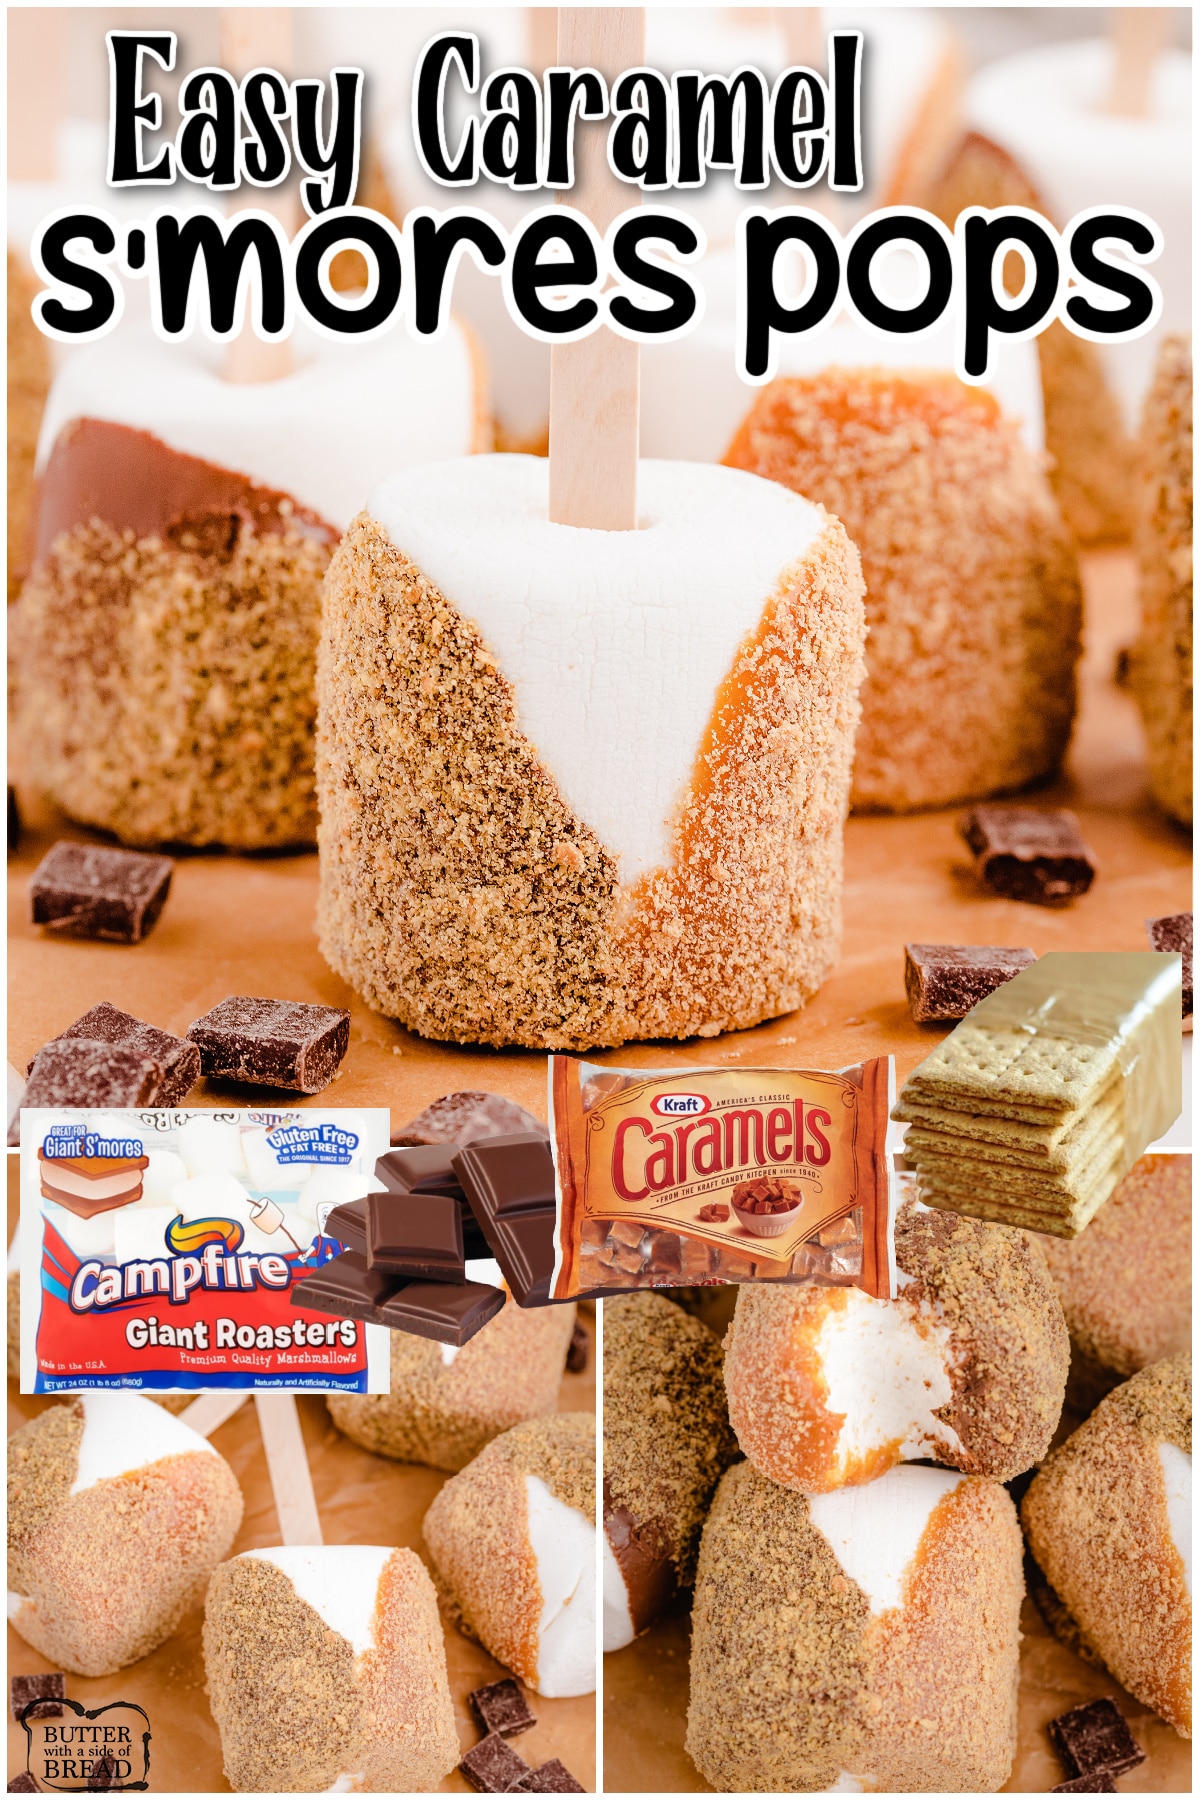 Caramel S'more Pops are a fun & tasty twist on classic s'mores! They're marshmallows dipped in caramel & chocolate, then coated with graham cracker for an easy make-ahead treat! 